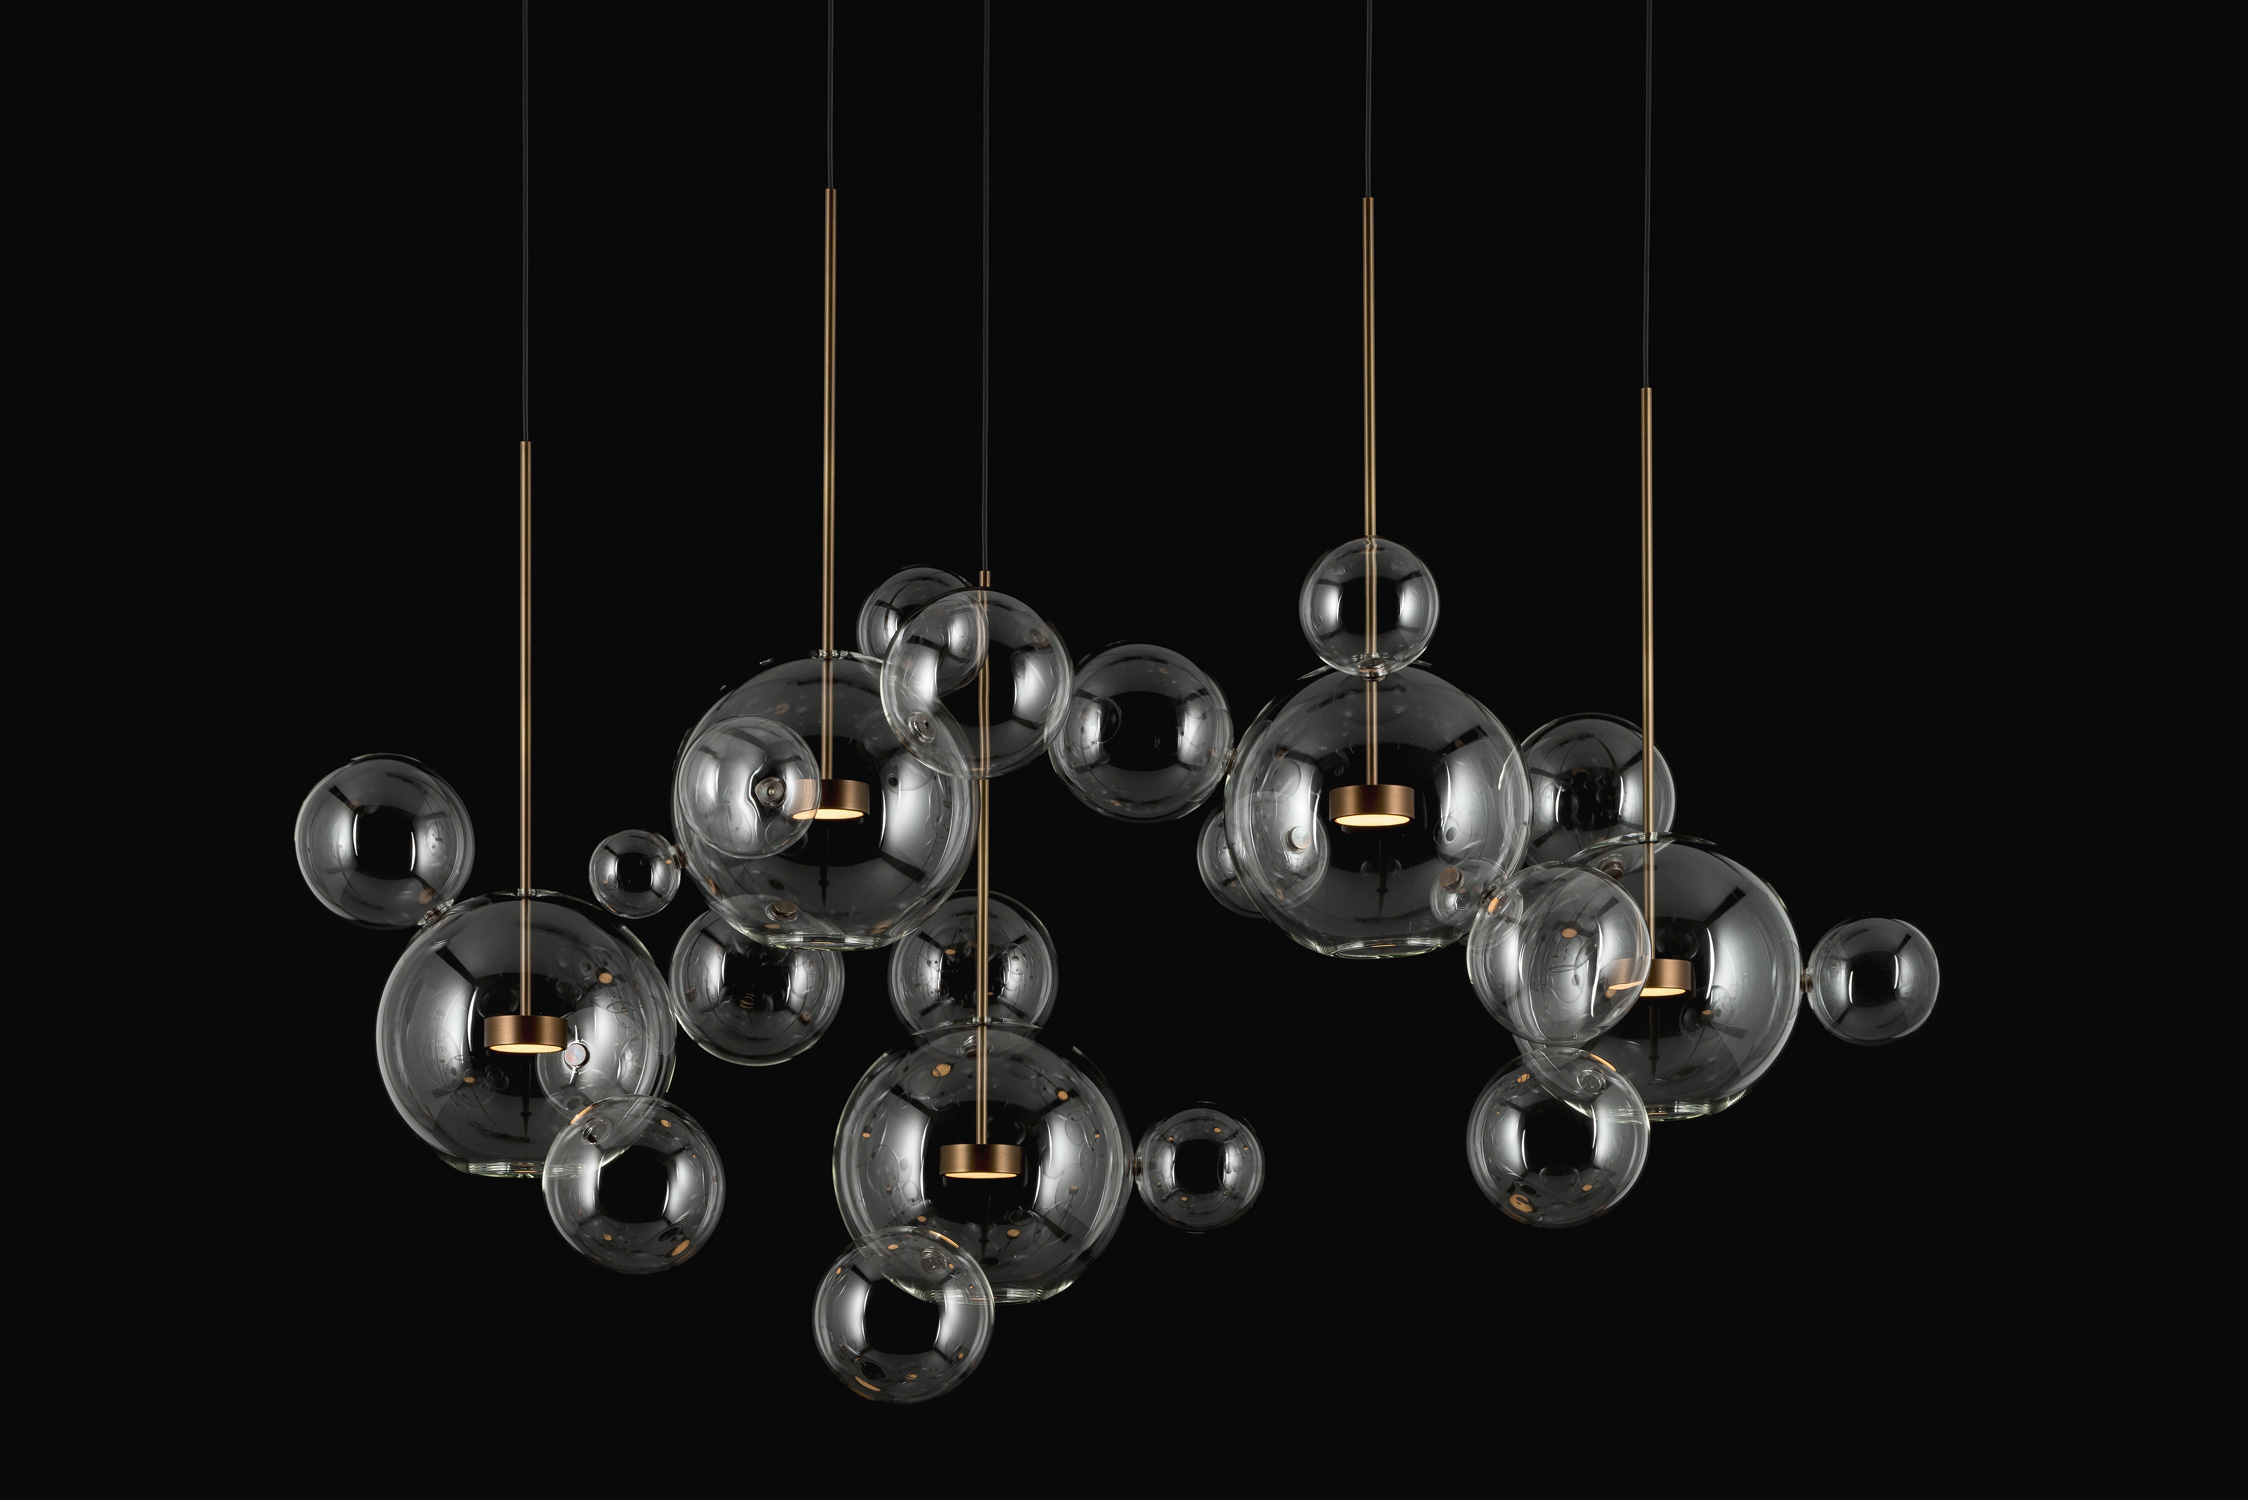 Giopato_Coombes_Bolle_Zigzag_Chandelier_24_Bubbles_Ph_FedericoVilla.jpg